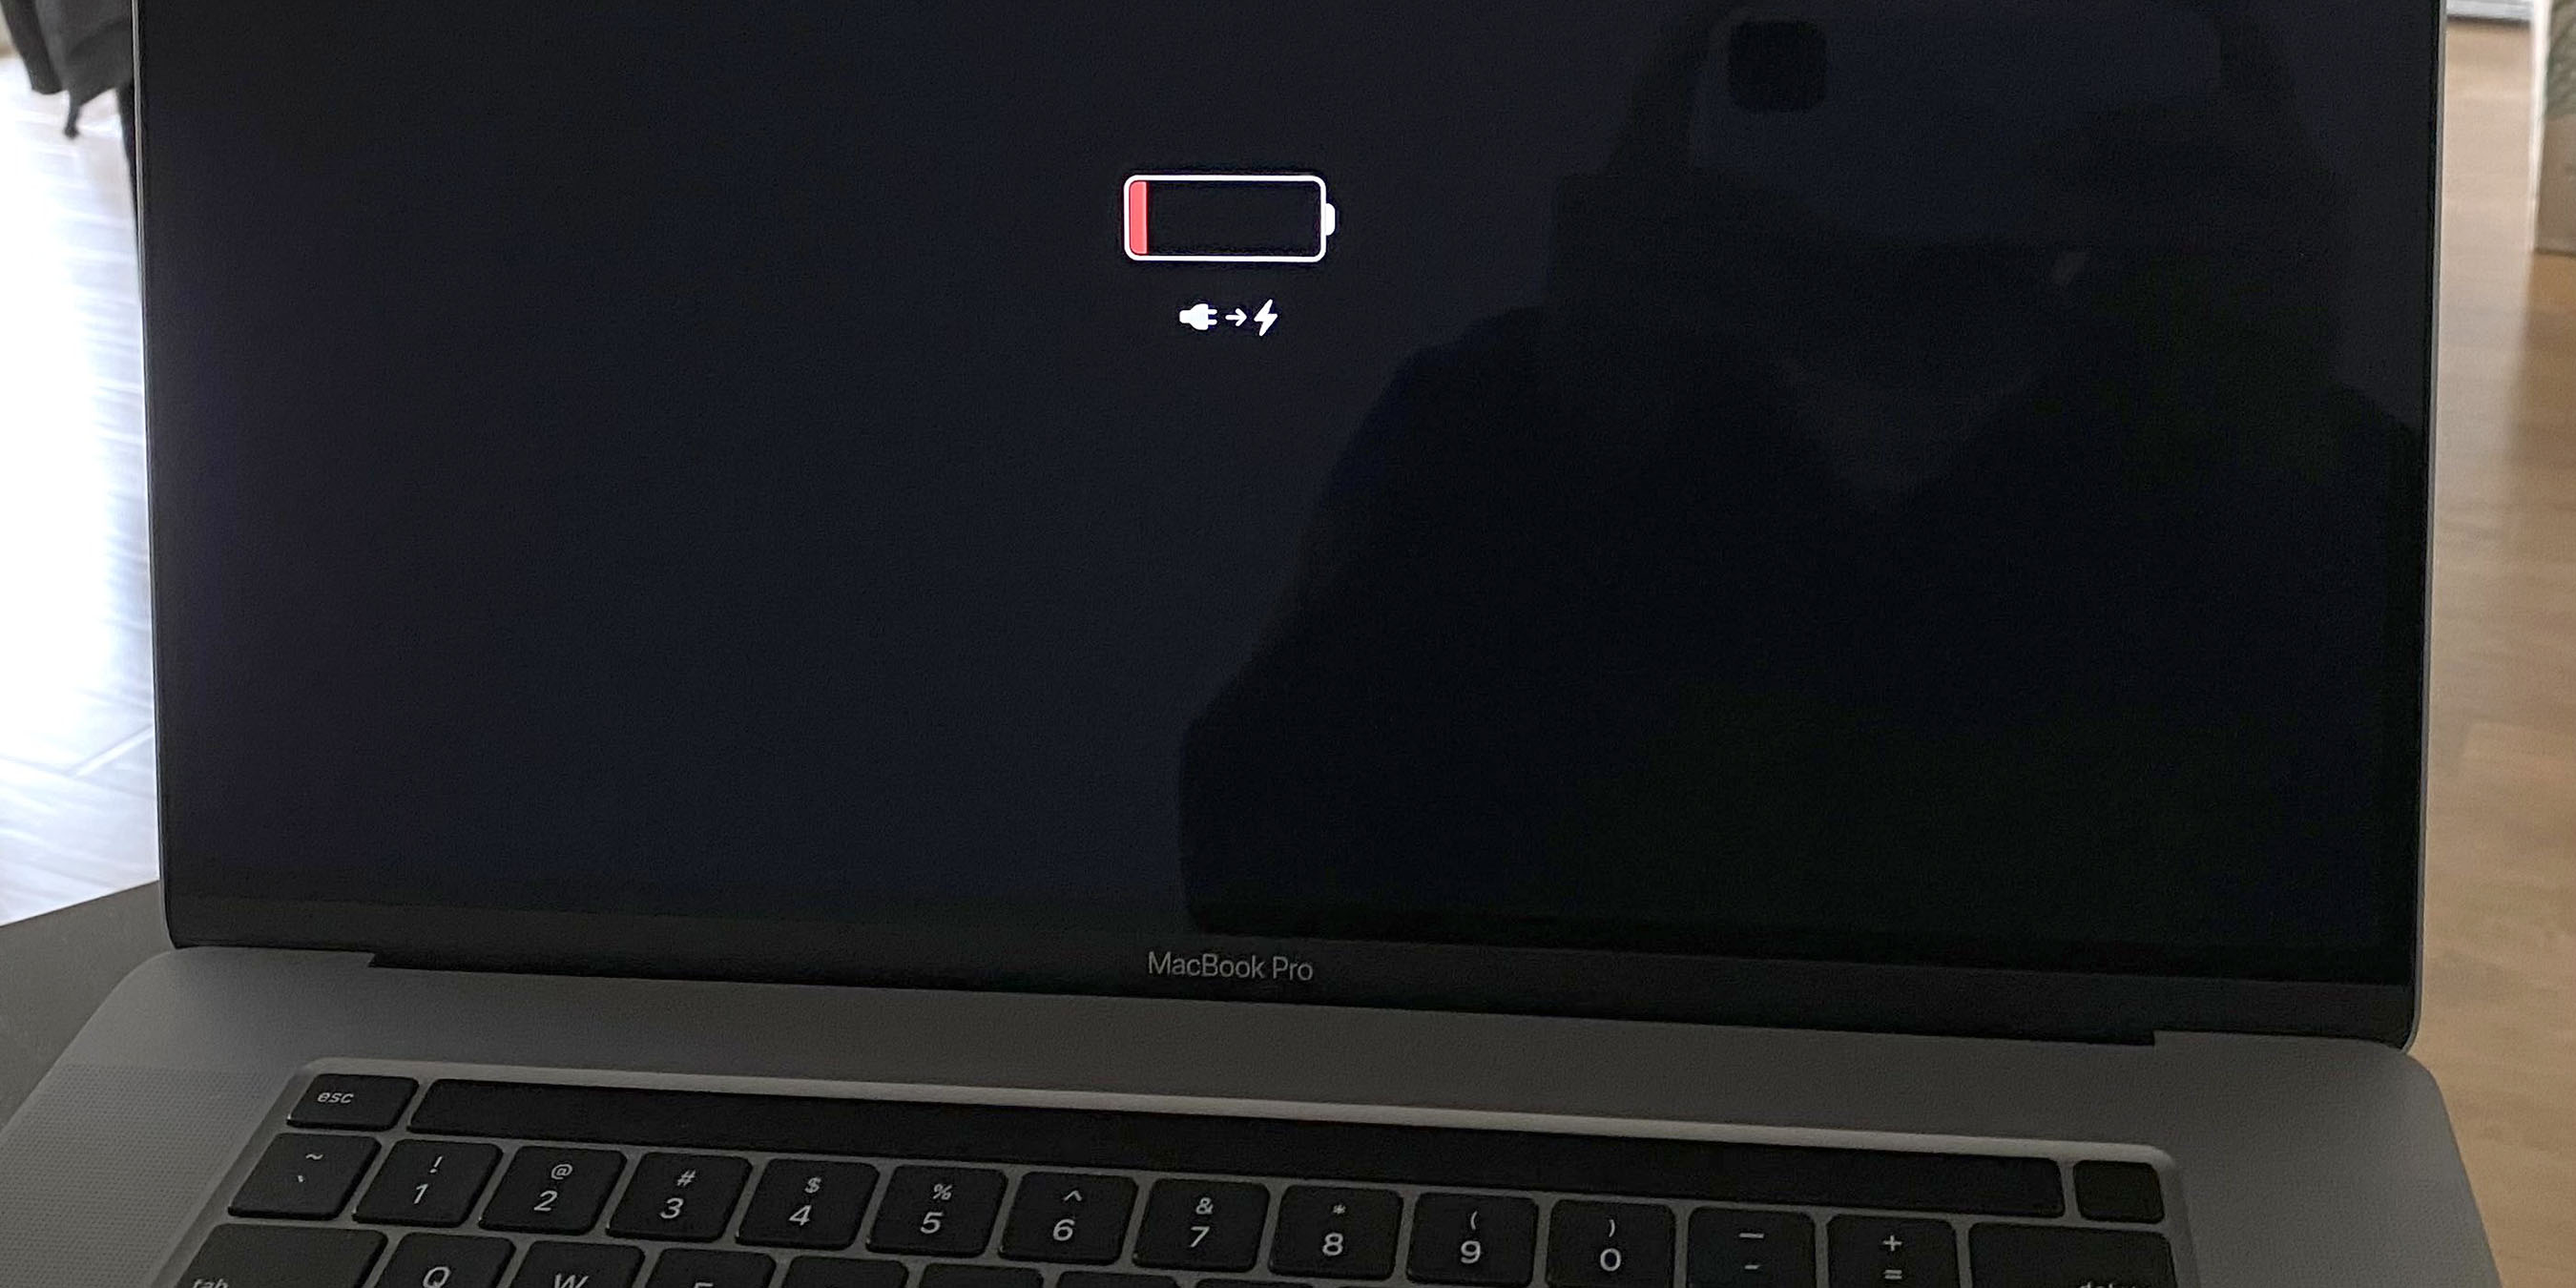 how to wake up mac book pro from sleep mode